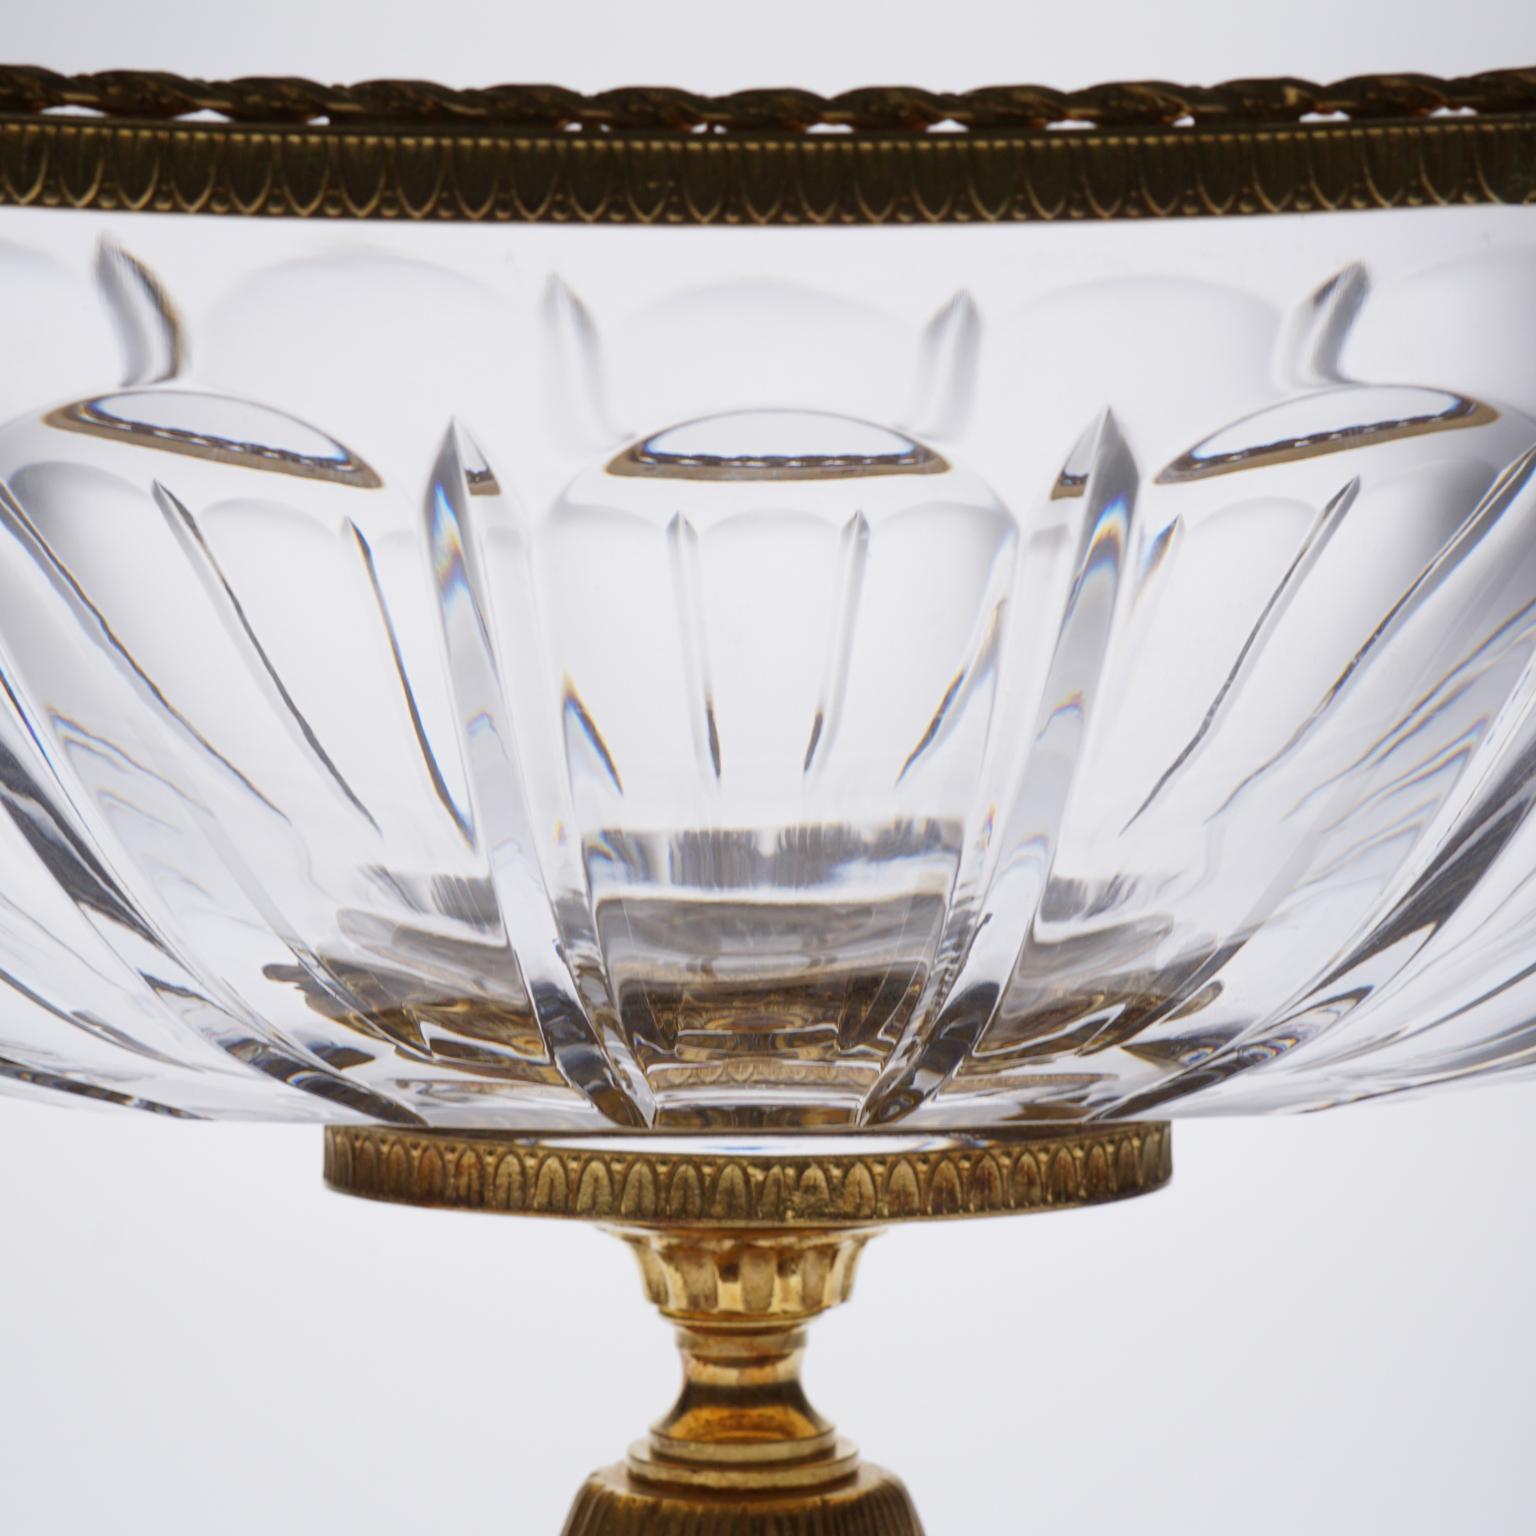 Clear crystal jardinière with bronze covered 22-carat gold, horses details

Impressive work on the 22-carat gold covered bronze: details with 2 horses on the handles.

High quality crystal handcrafted. 

The crystal is embellished with